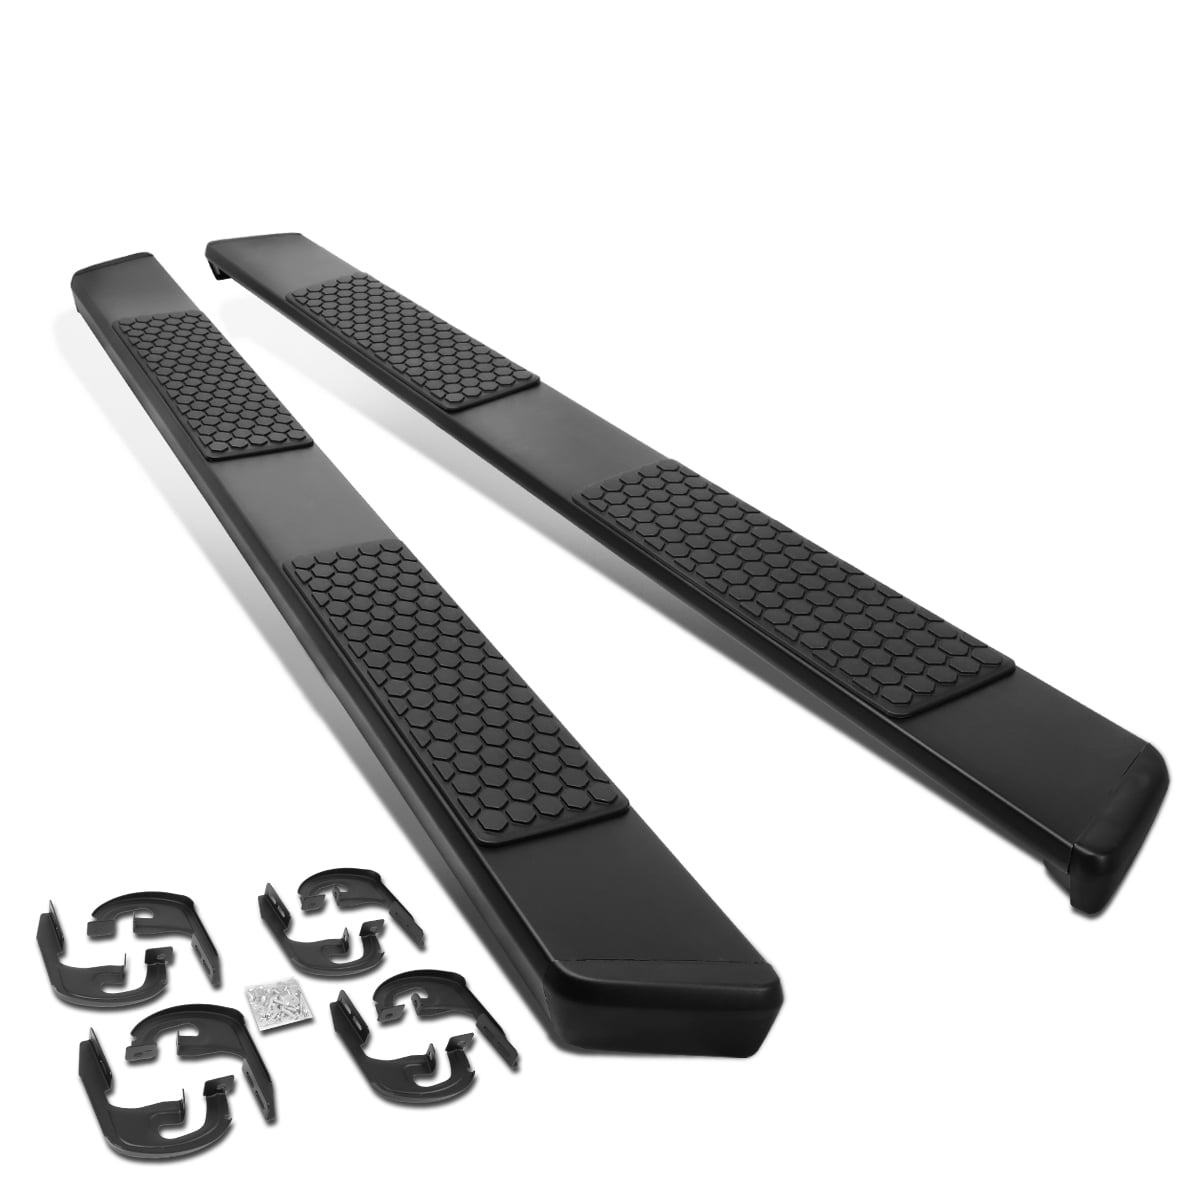 For 2019 to 2020 Chevy Silverado / GMC Sierra Crew Cab Pair 5" Coated Stainless Steel Flat Step Stainless Steel Running Boards For Chevy Silverado